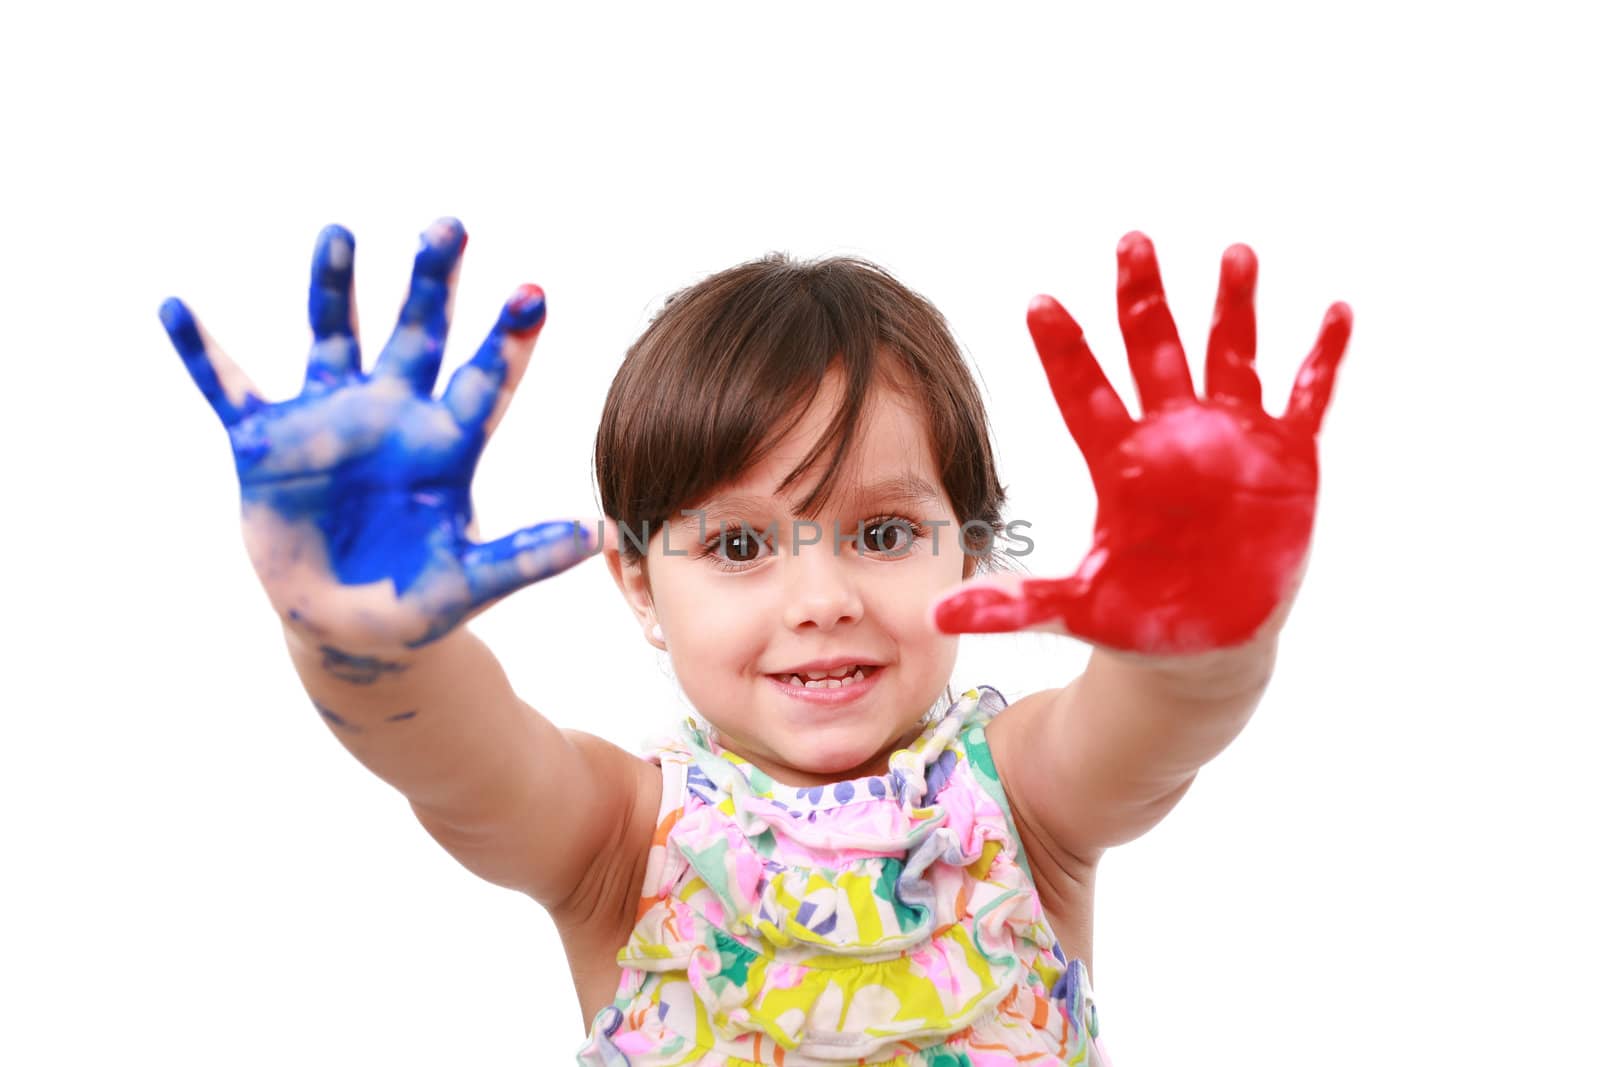 beautiful little girl with her hands in the paint